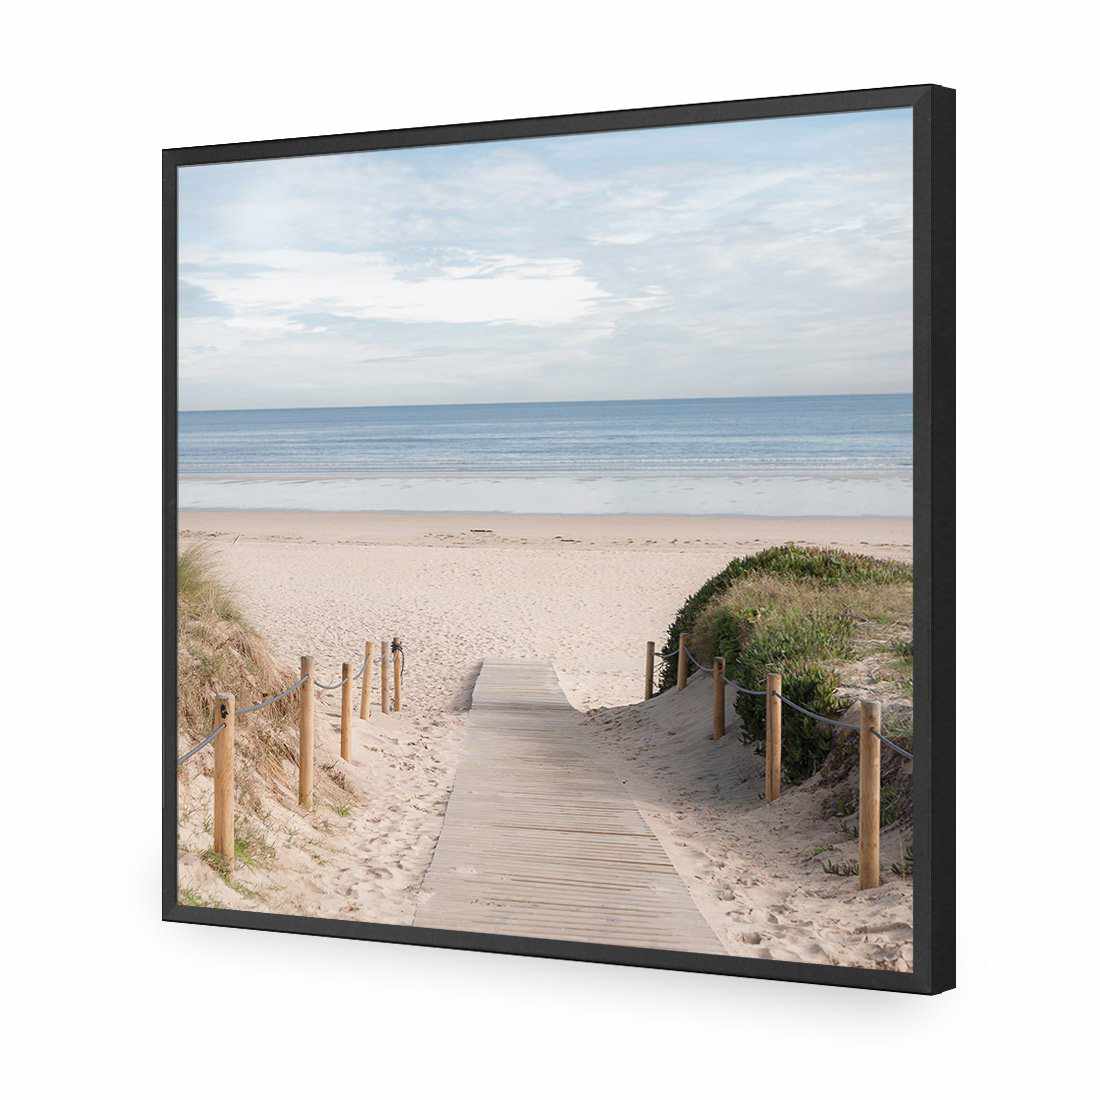 Pathway To The Sea, Square-Acrylic-Wall Art Design-Without Border-Acrylic - Black Frame-37x37cm-Wall Art Designs